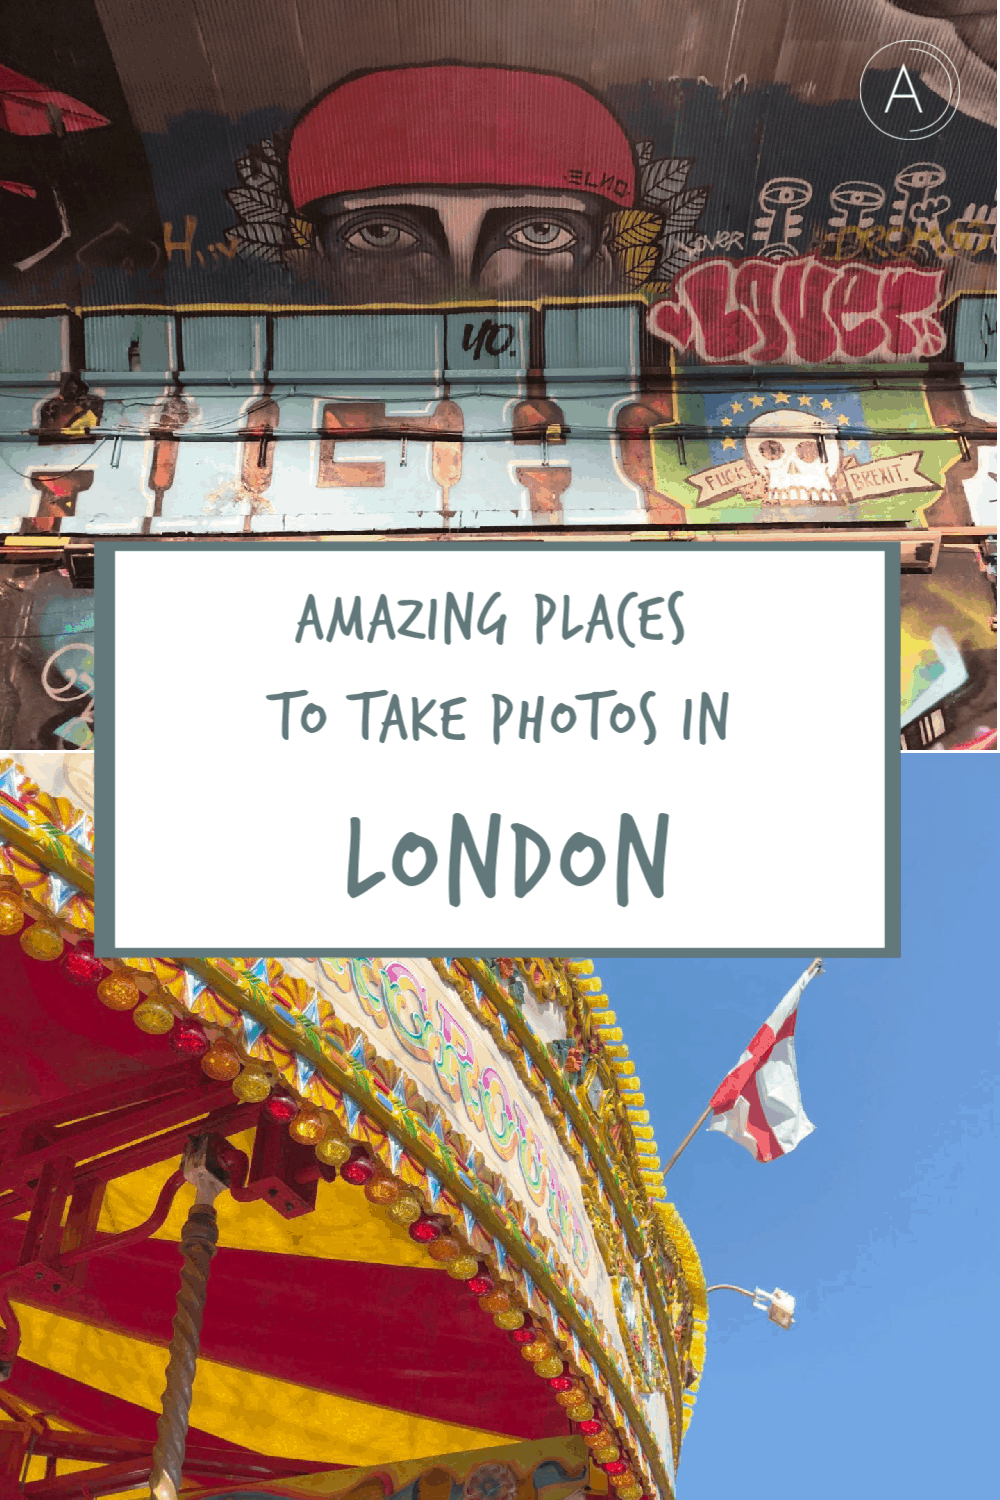 Amazing places to take photos and things to see in London